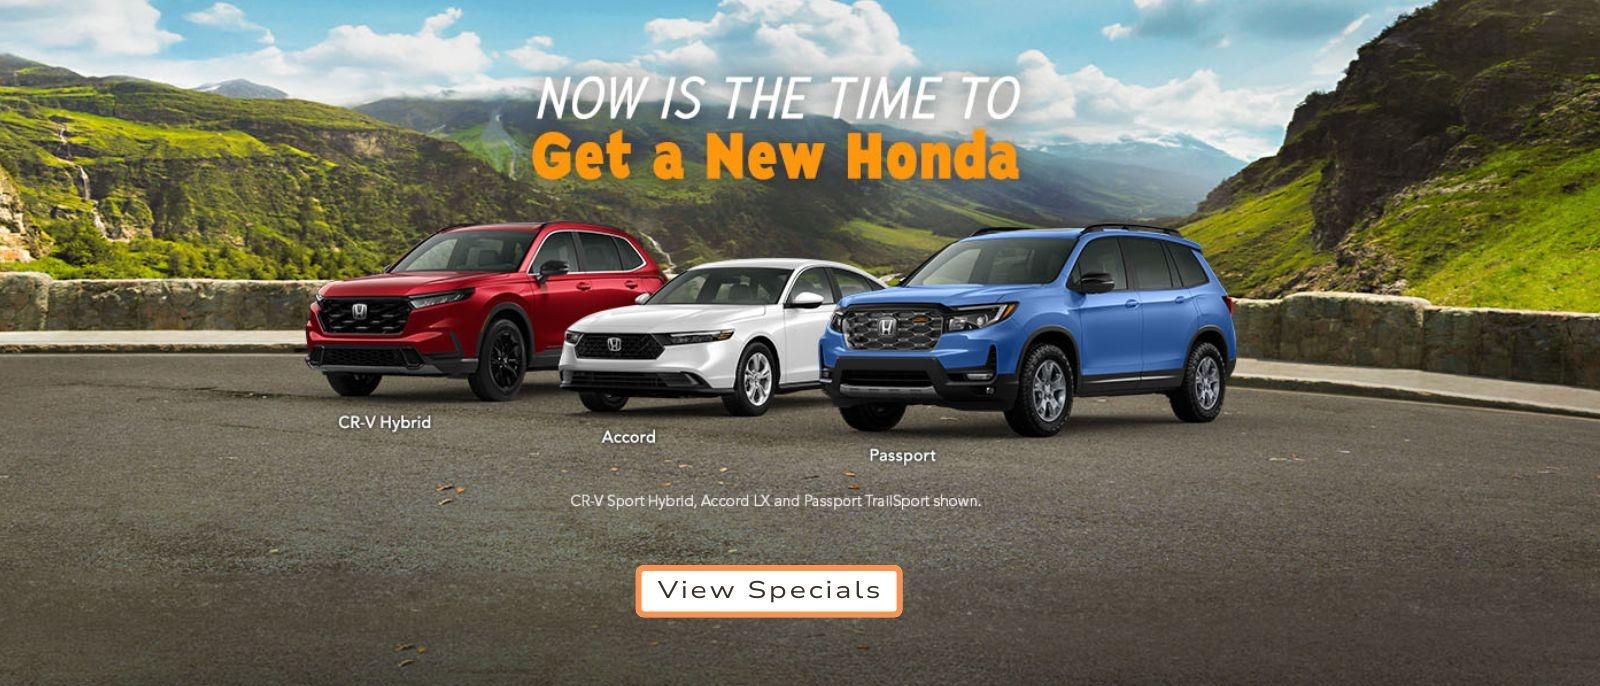 Now is The Time To Get a New Honda